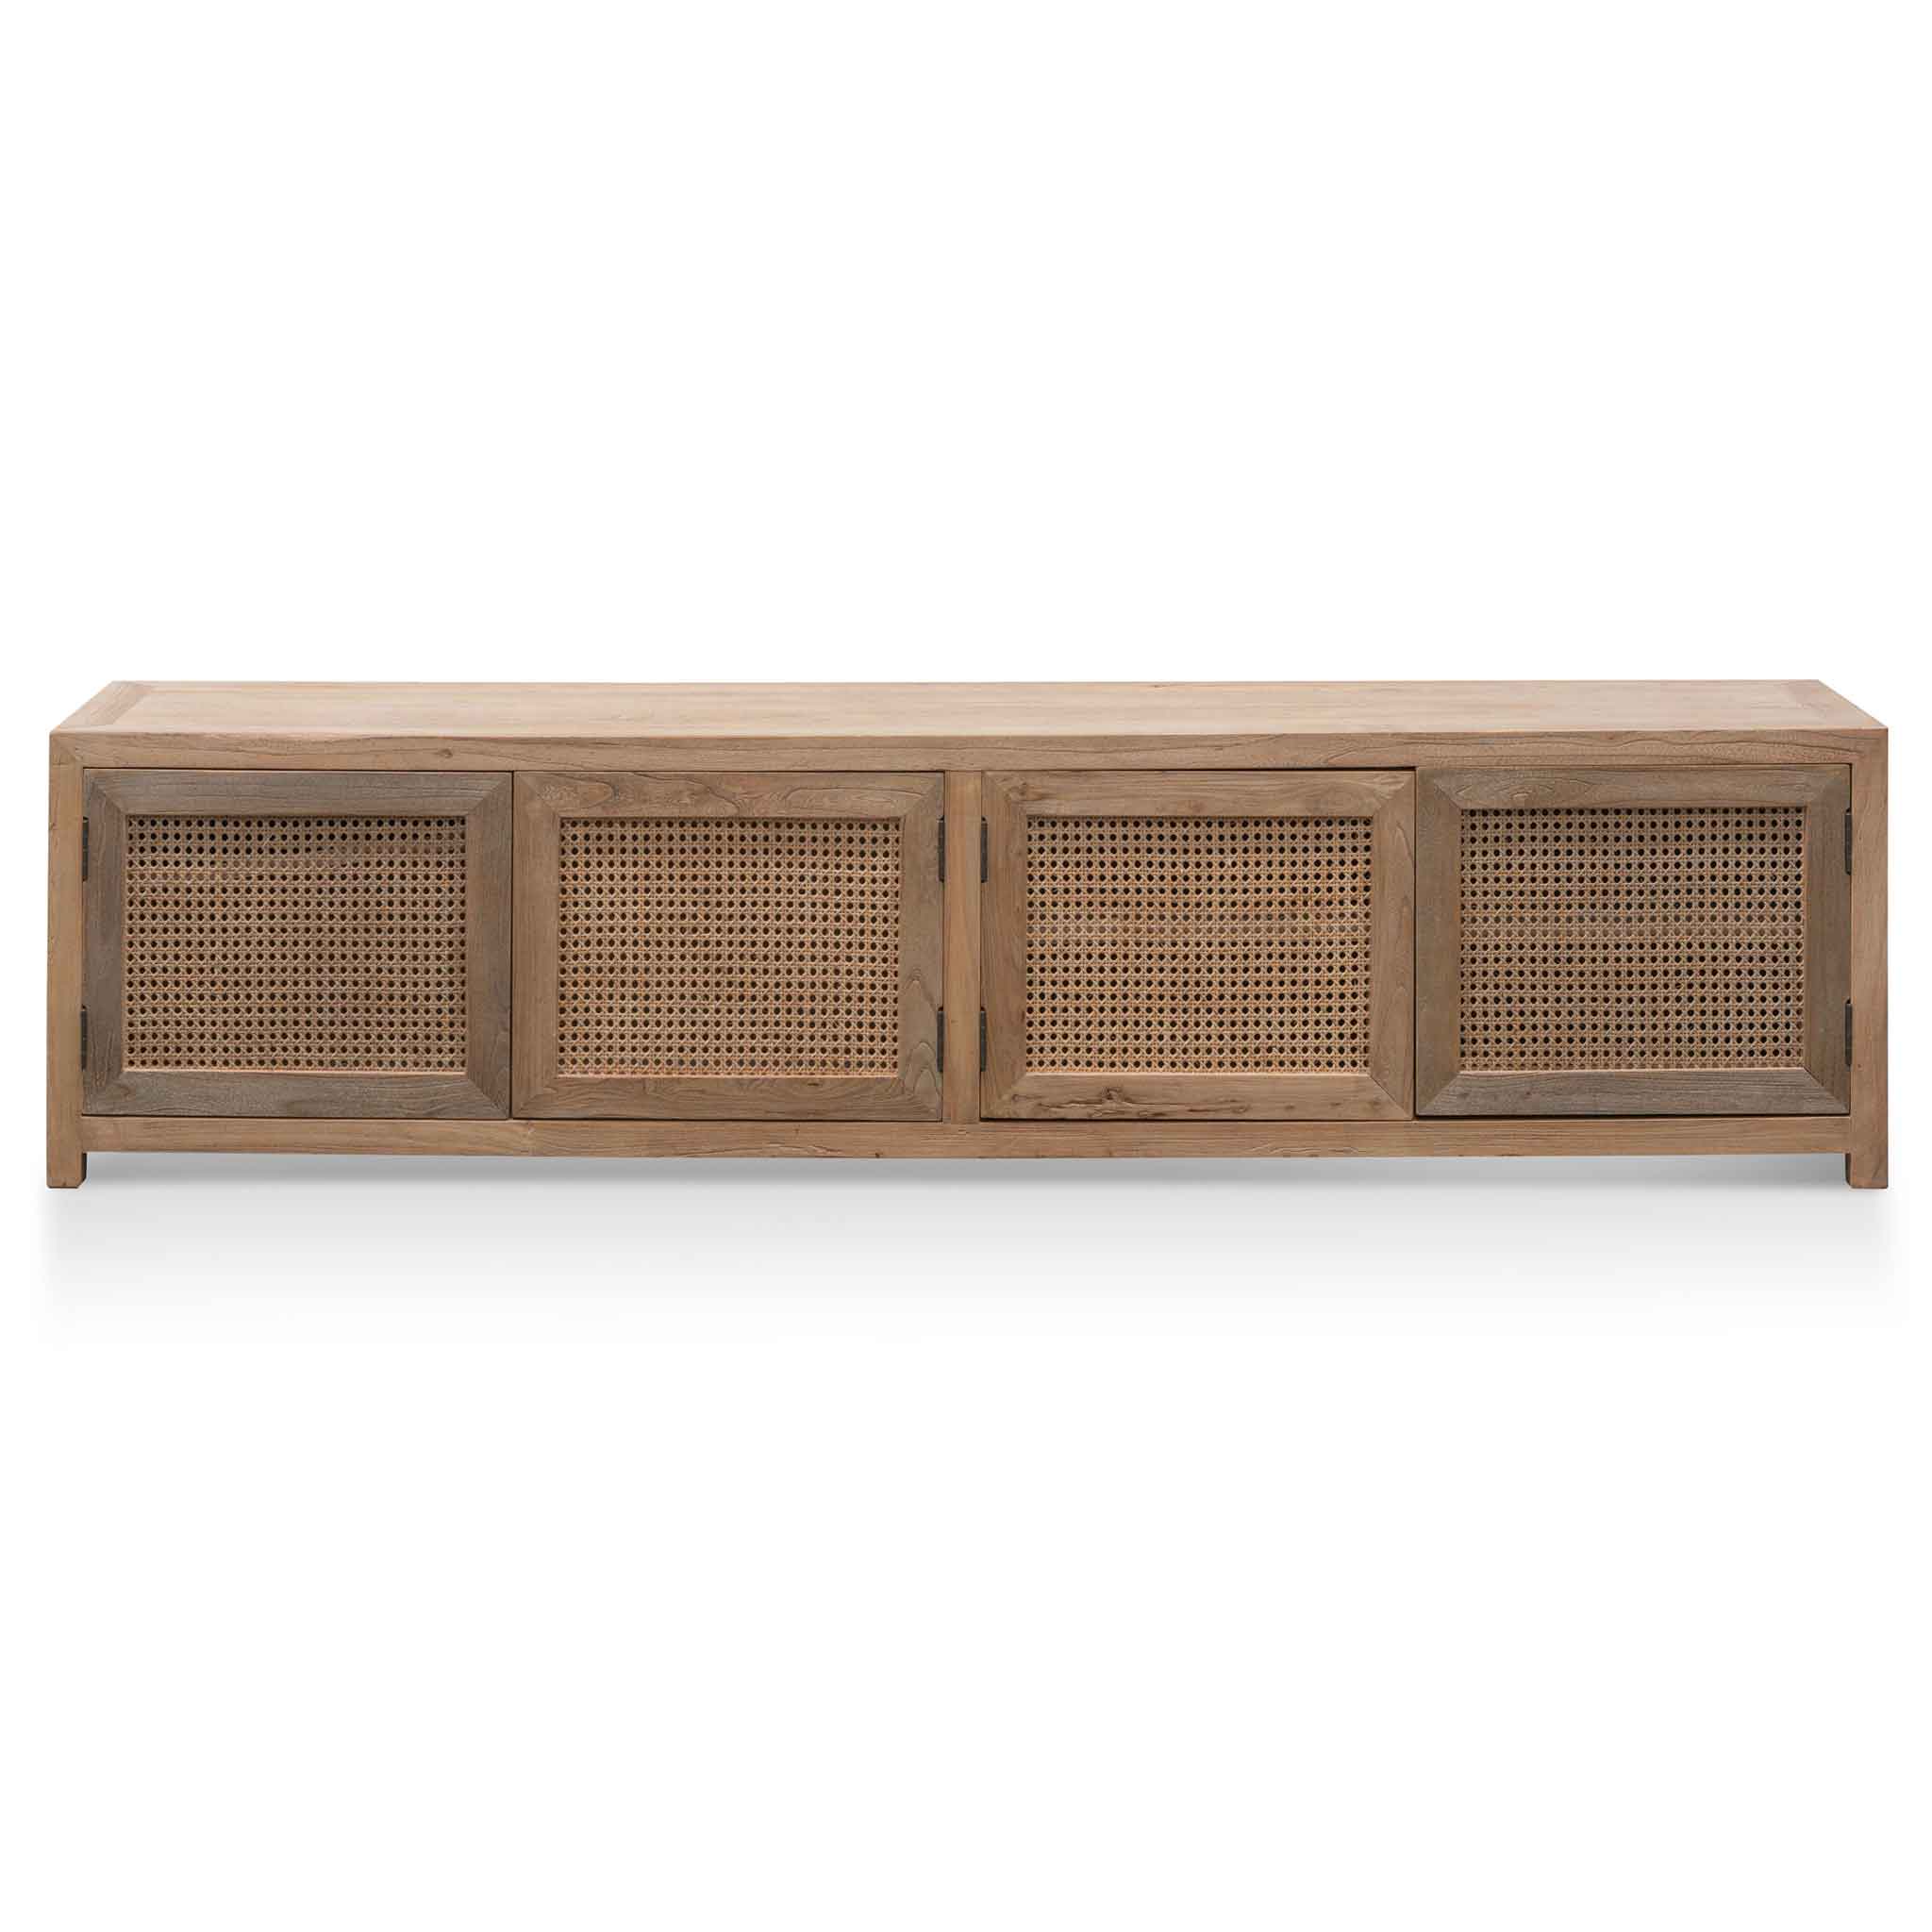 Tapia 2m TV Entertainment Unit - Natural with Rattan Doors